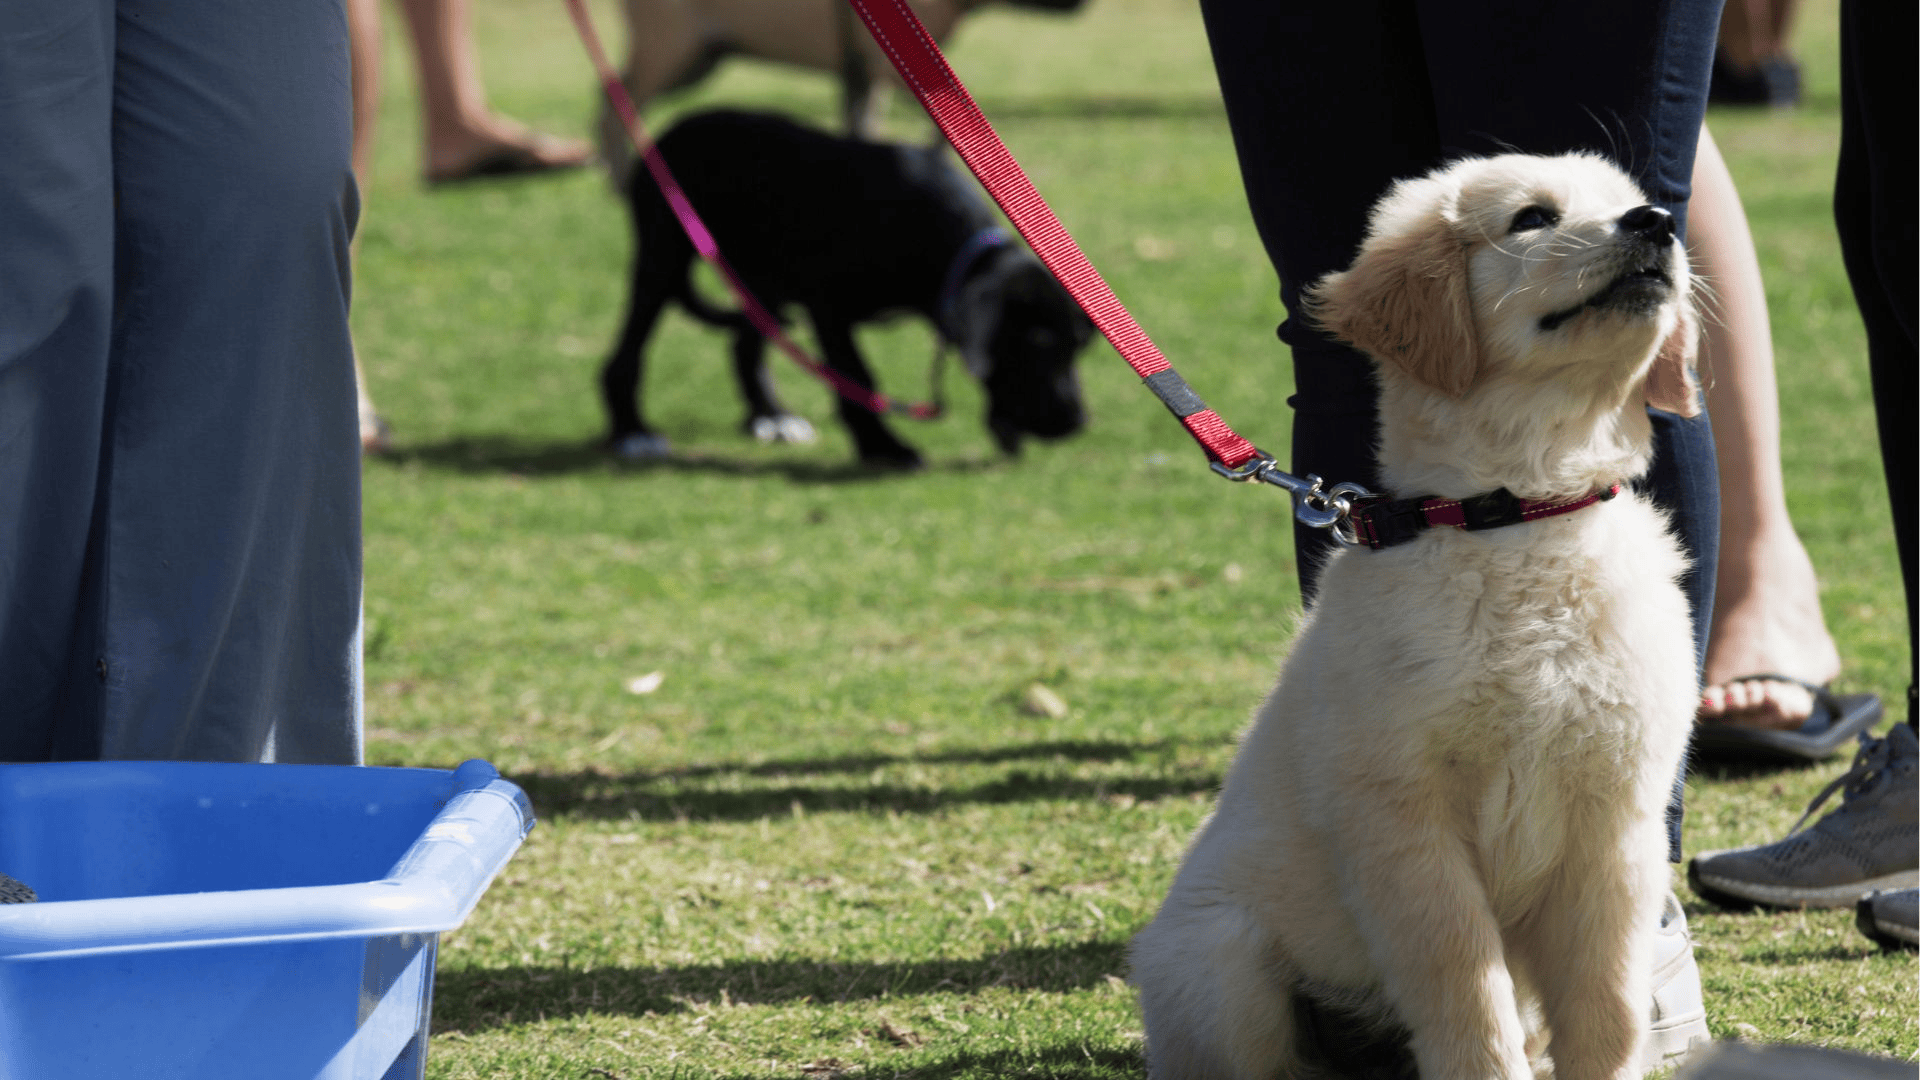 Once you have equipment like a dog leash, you can start leash training. Leash train your dog in short sessions.